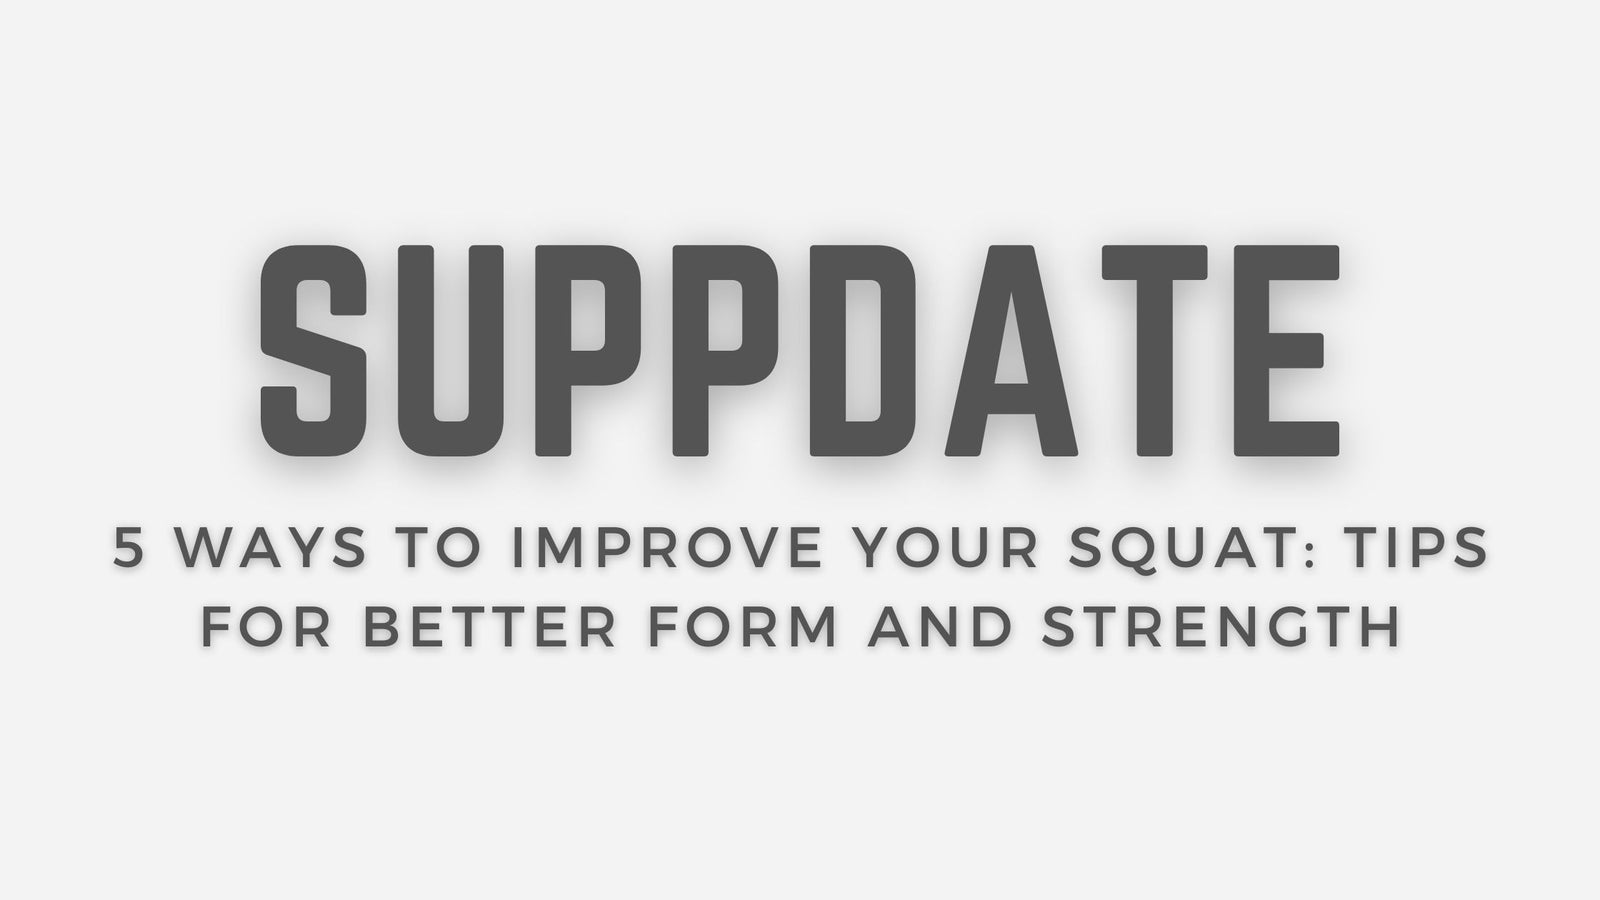 5 Ways to Improve Your Squat: Tips for Better Form and Strength blog post the supps house